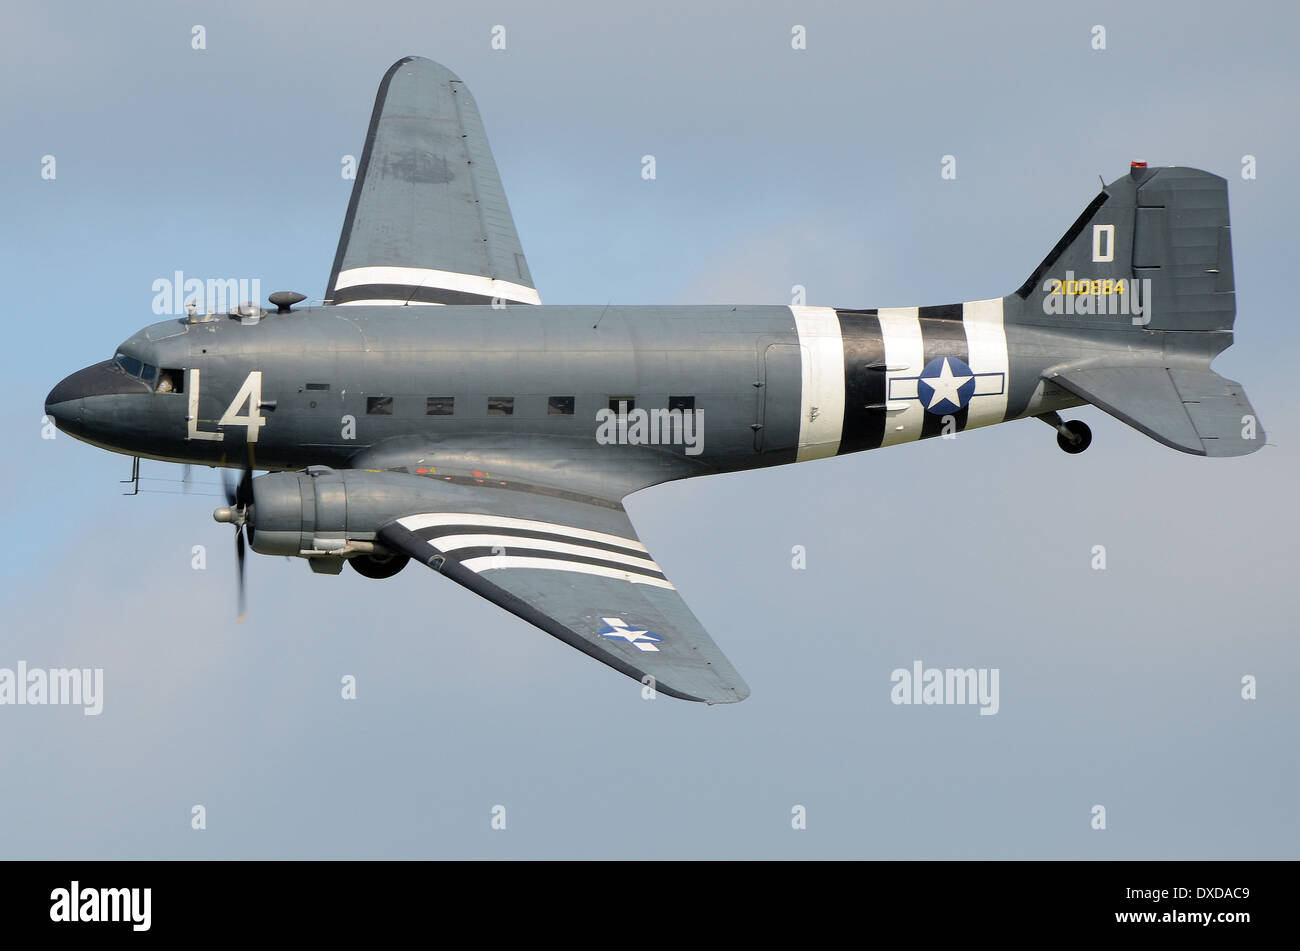 Douglas C-47 Skytrain plane in period camouflage markings including D Day 'invasion stripes'. Second World War transport plane flying at airshow Stock Photo